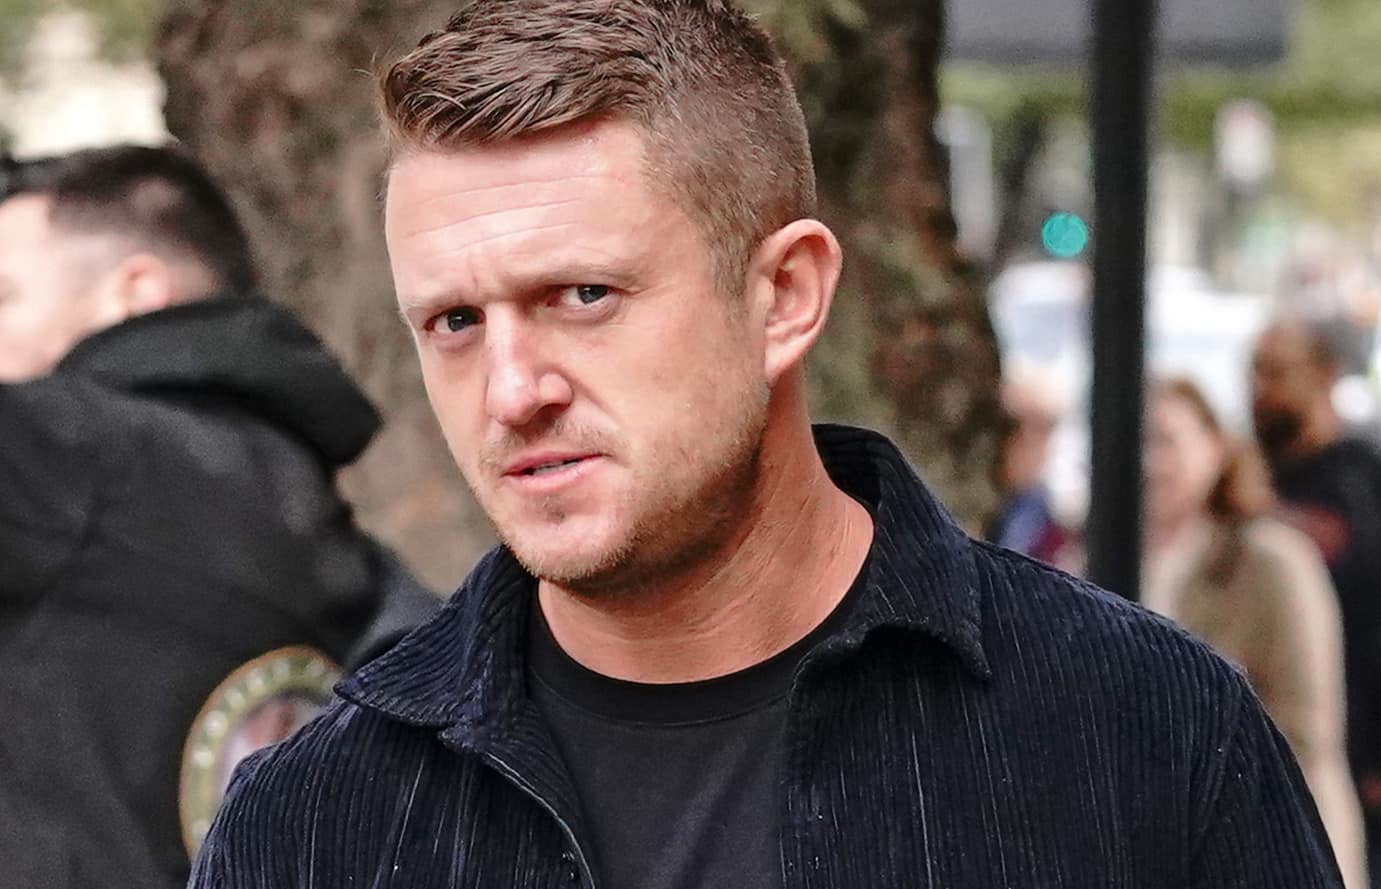 ‘He’s no journalist, he’s a muppet’ – Tommy Robinson hammered for latest claim